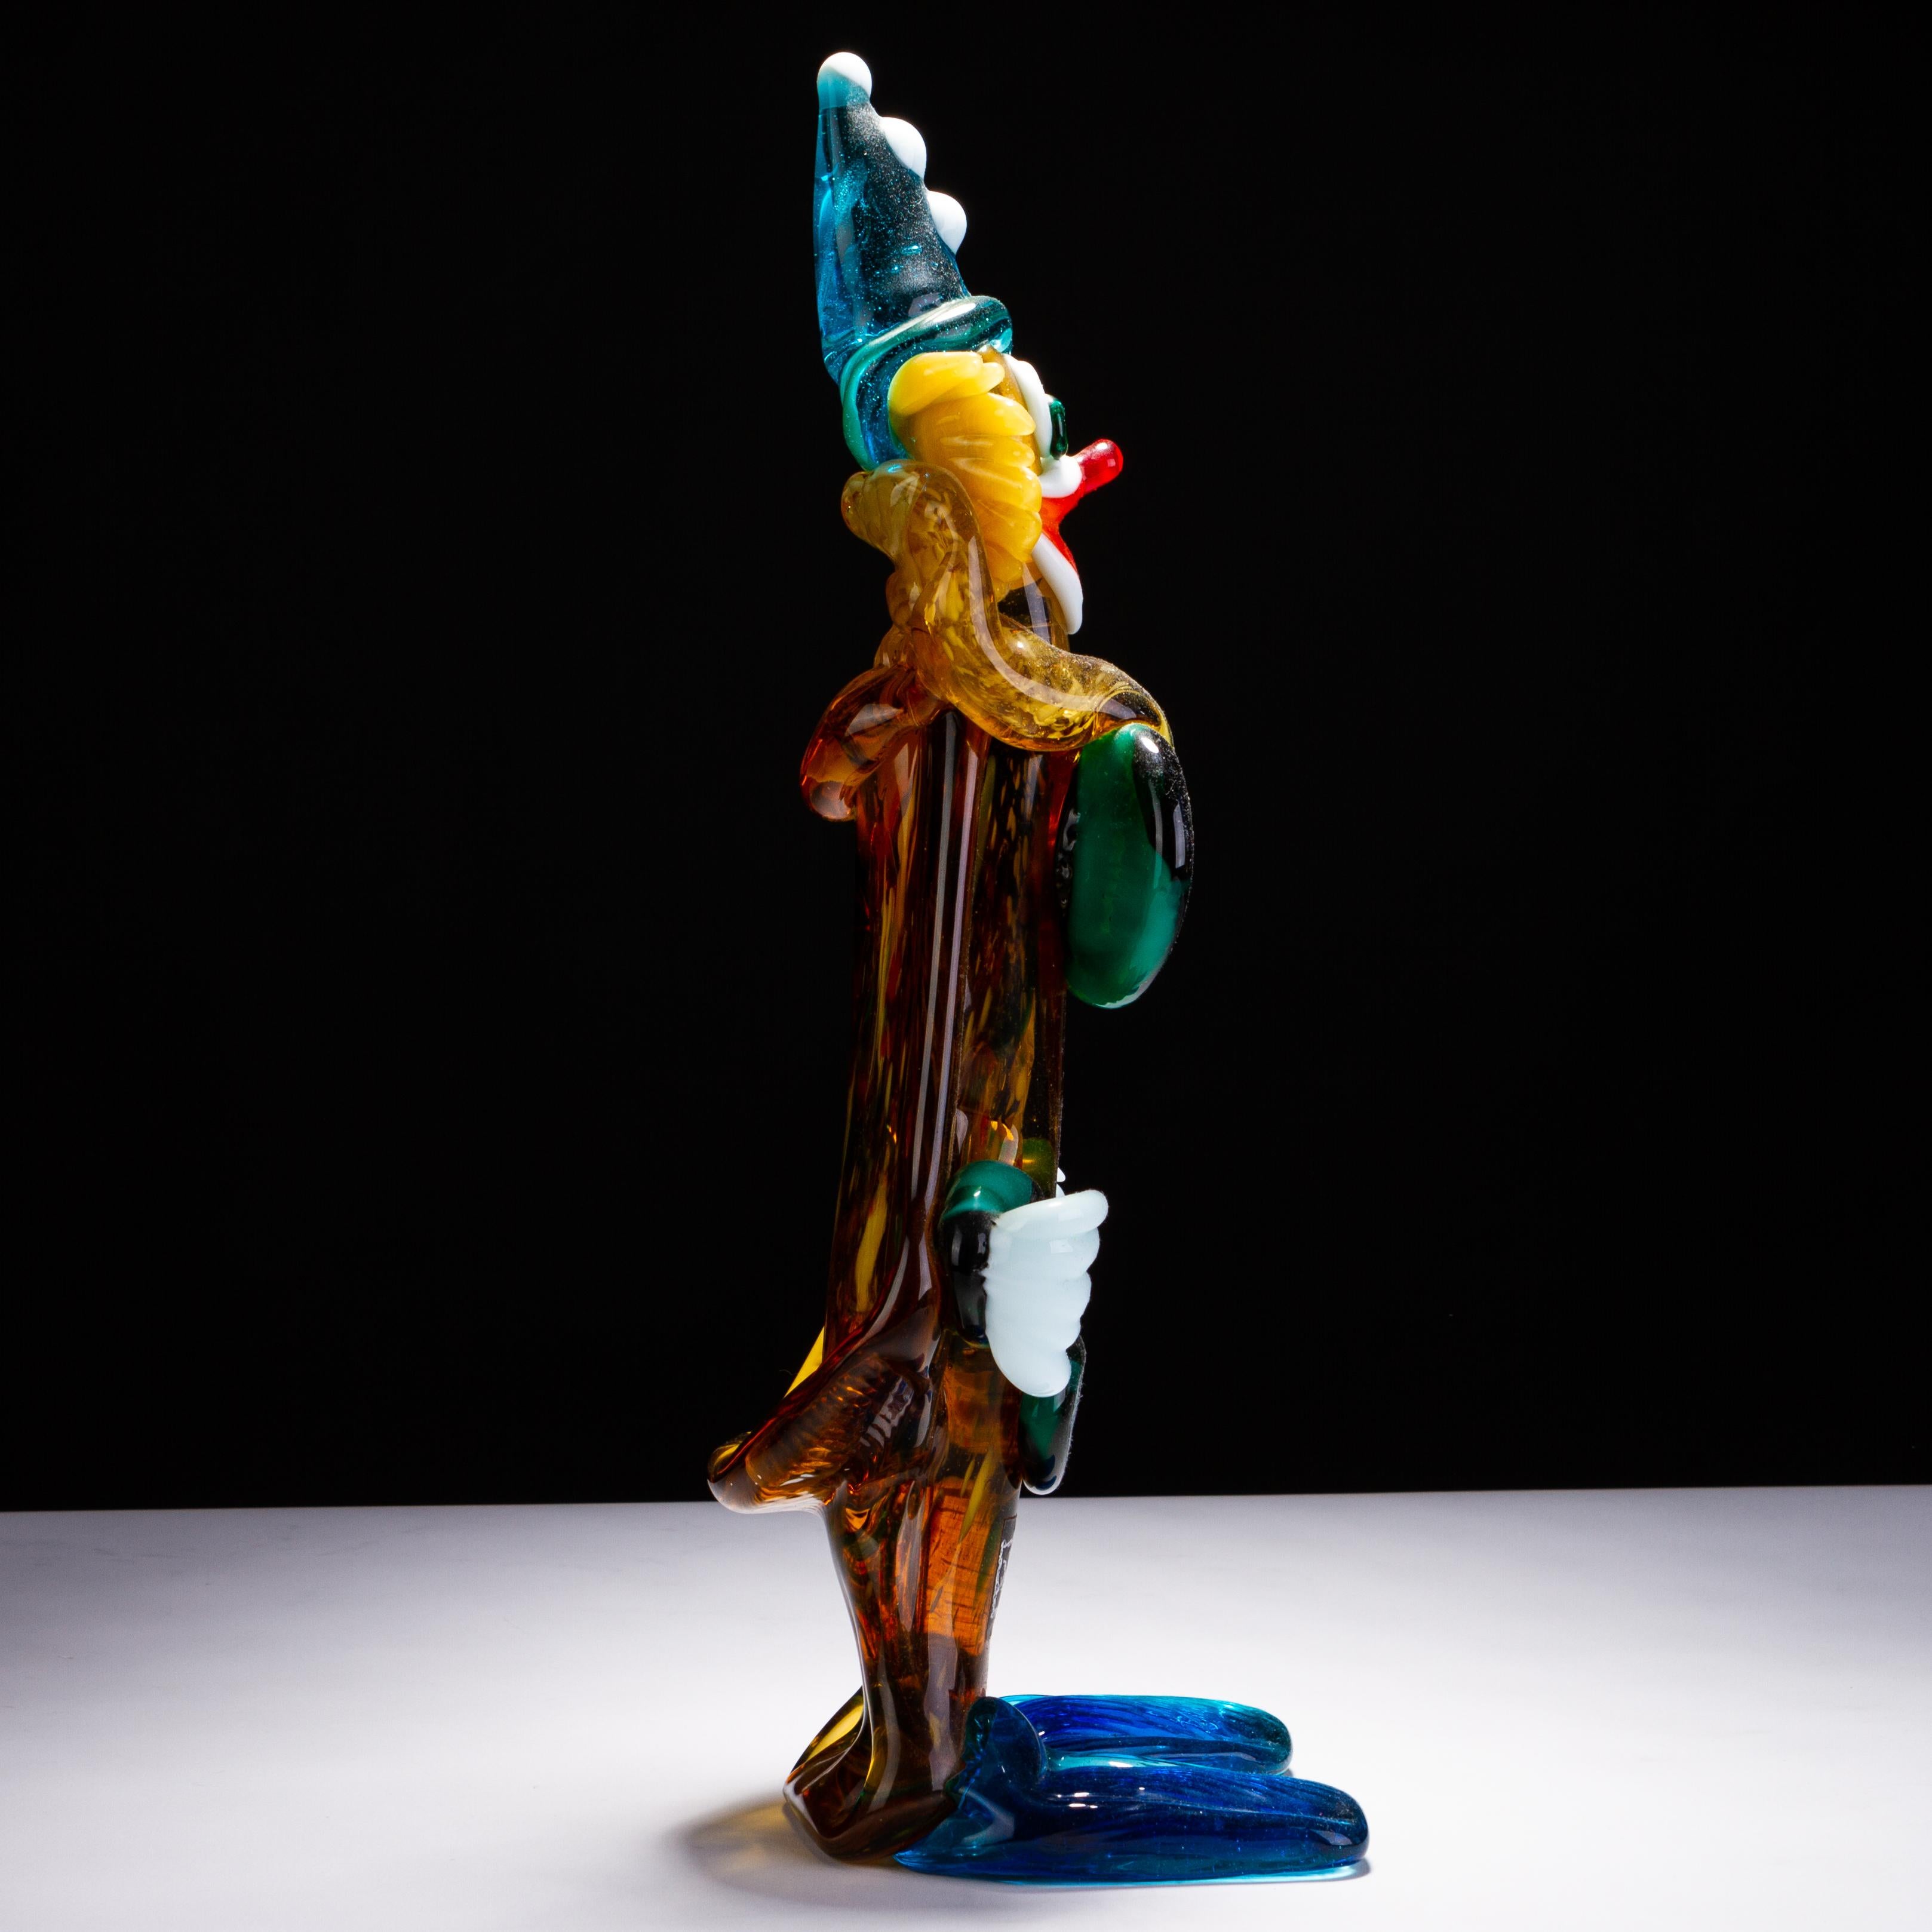 Large Italian Murano Venetian Mid-Century Hand Blown Glass Clown Sculpture 
Very good condition
From a private collection
Free international shipping